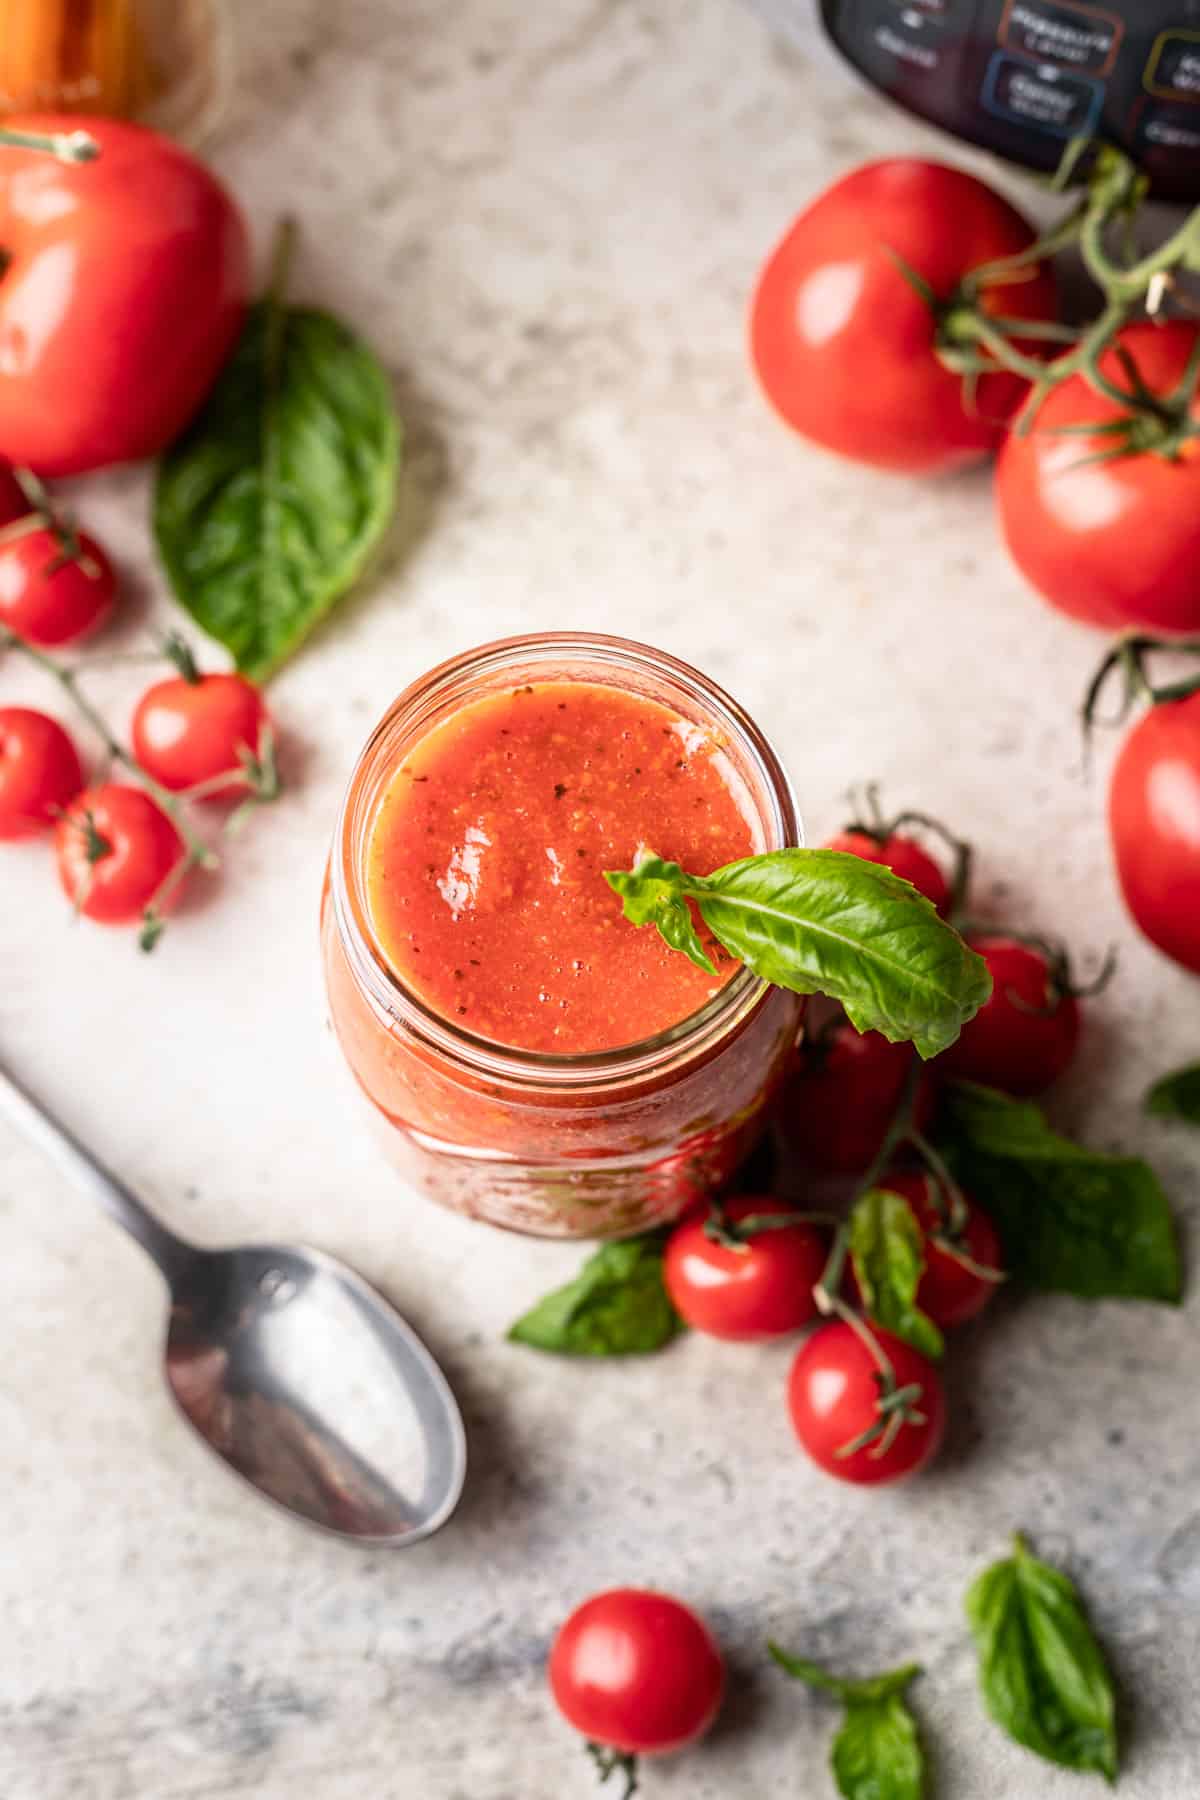 Instant pot tomato sauce in a glass jar with fresh basil and tomatoes.